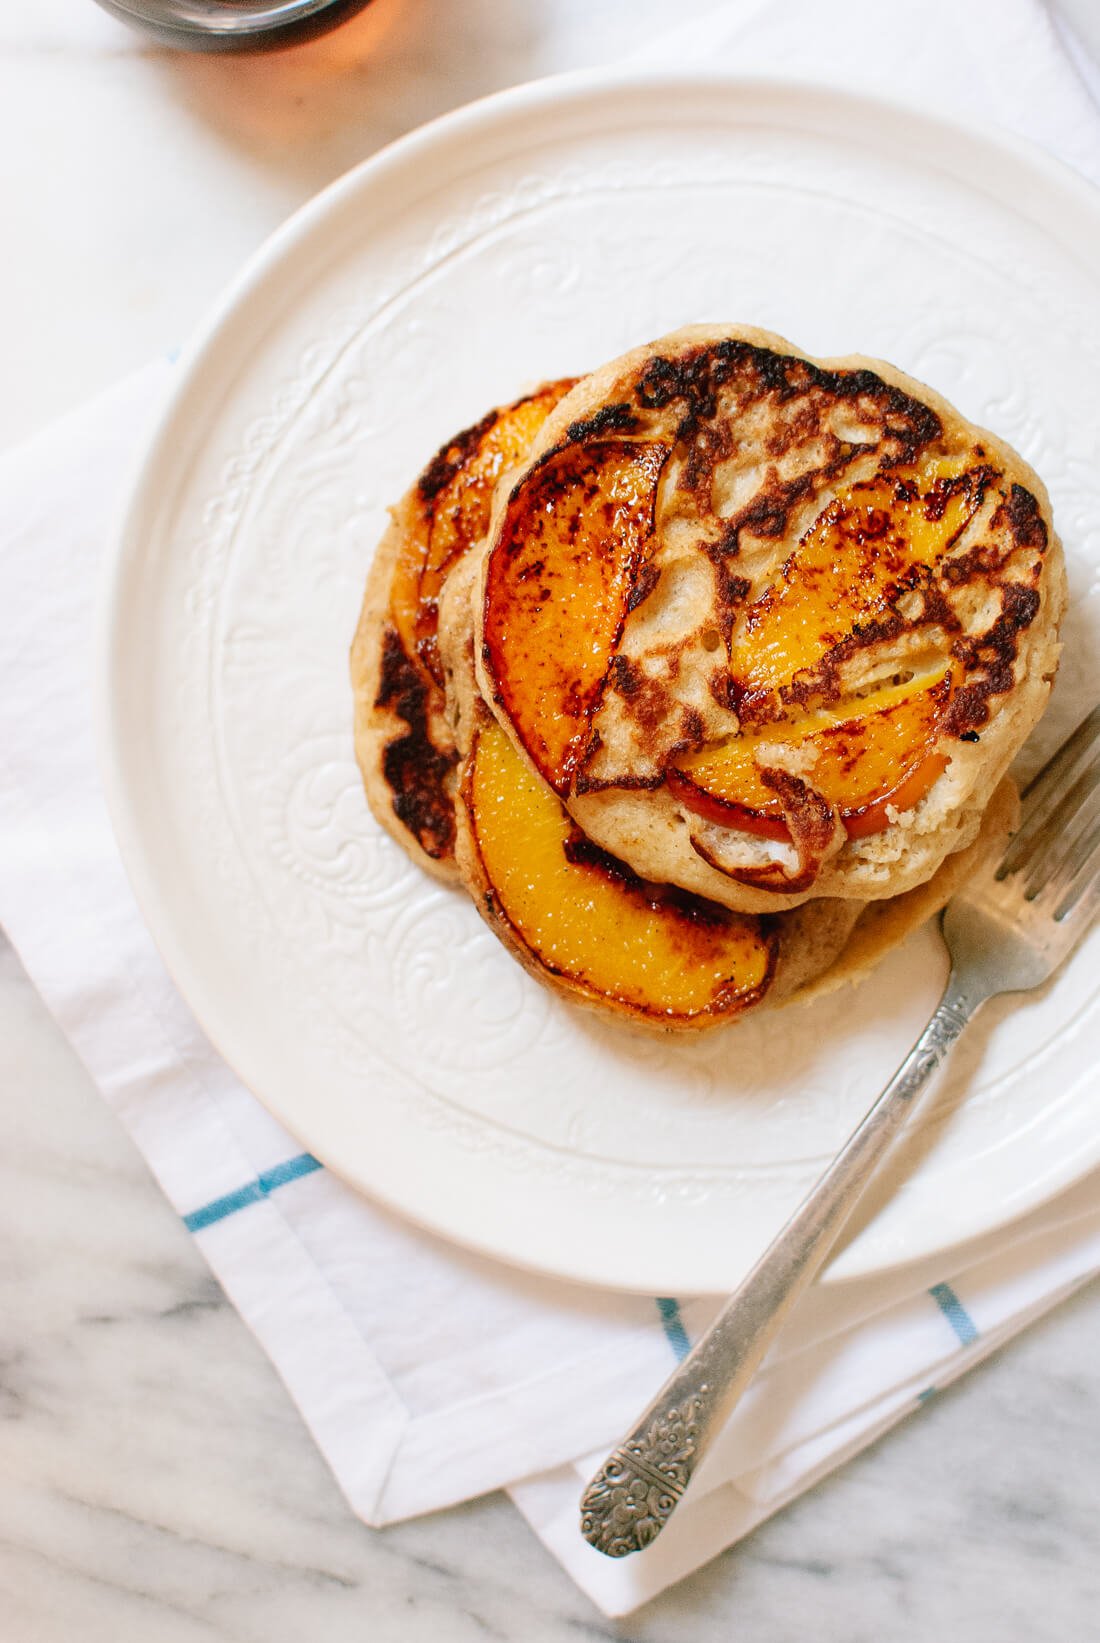 Peach and oat pancakes (gluten free)